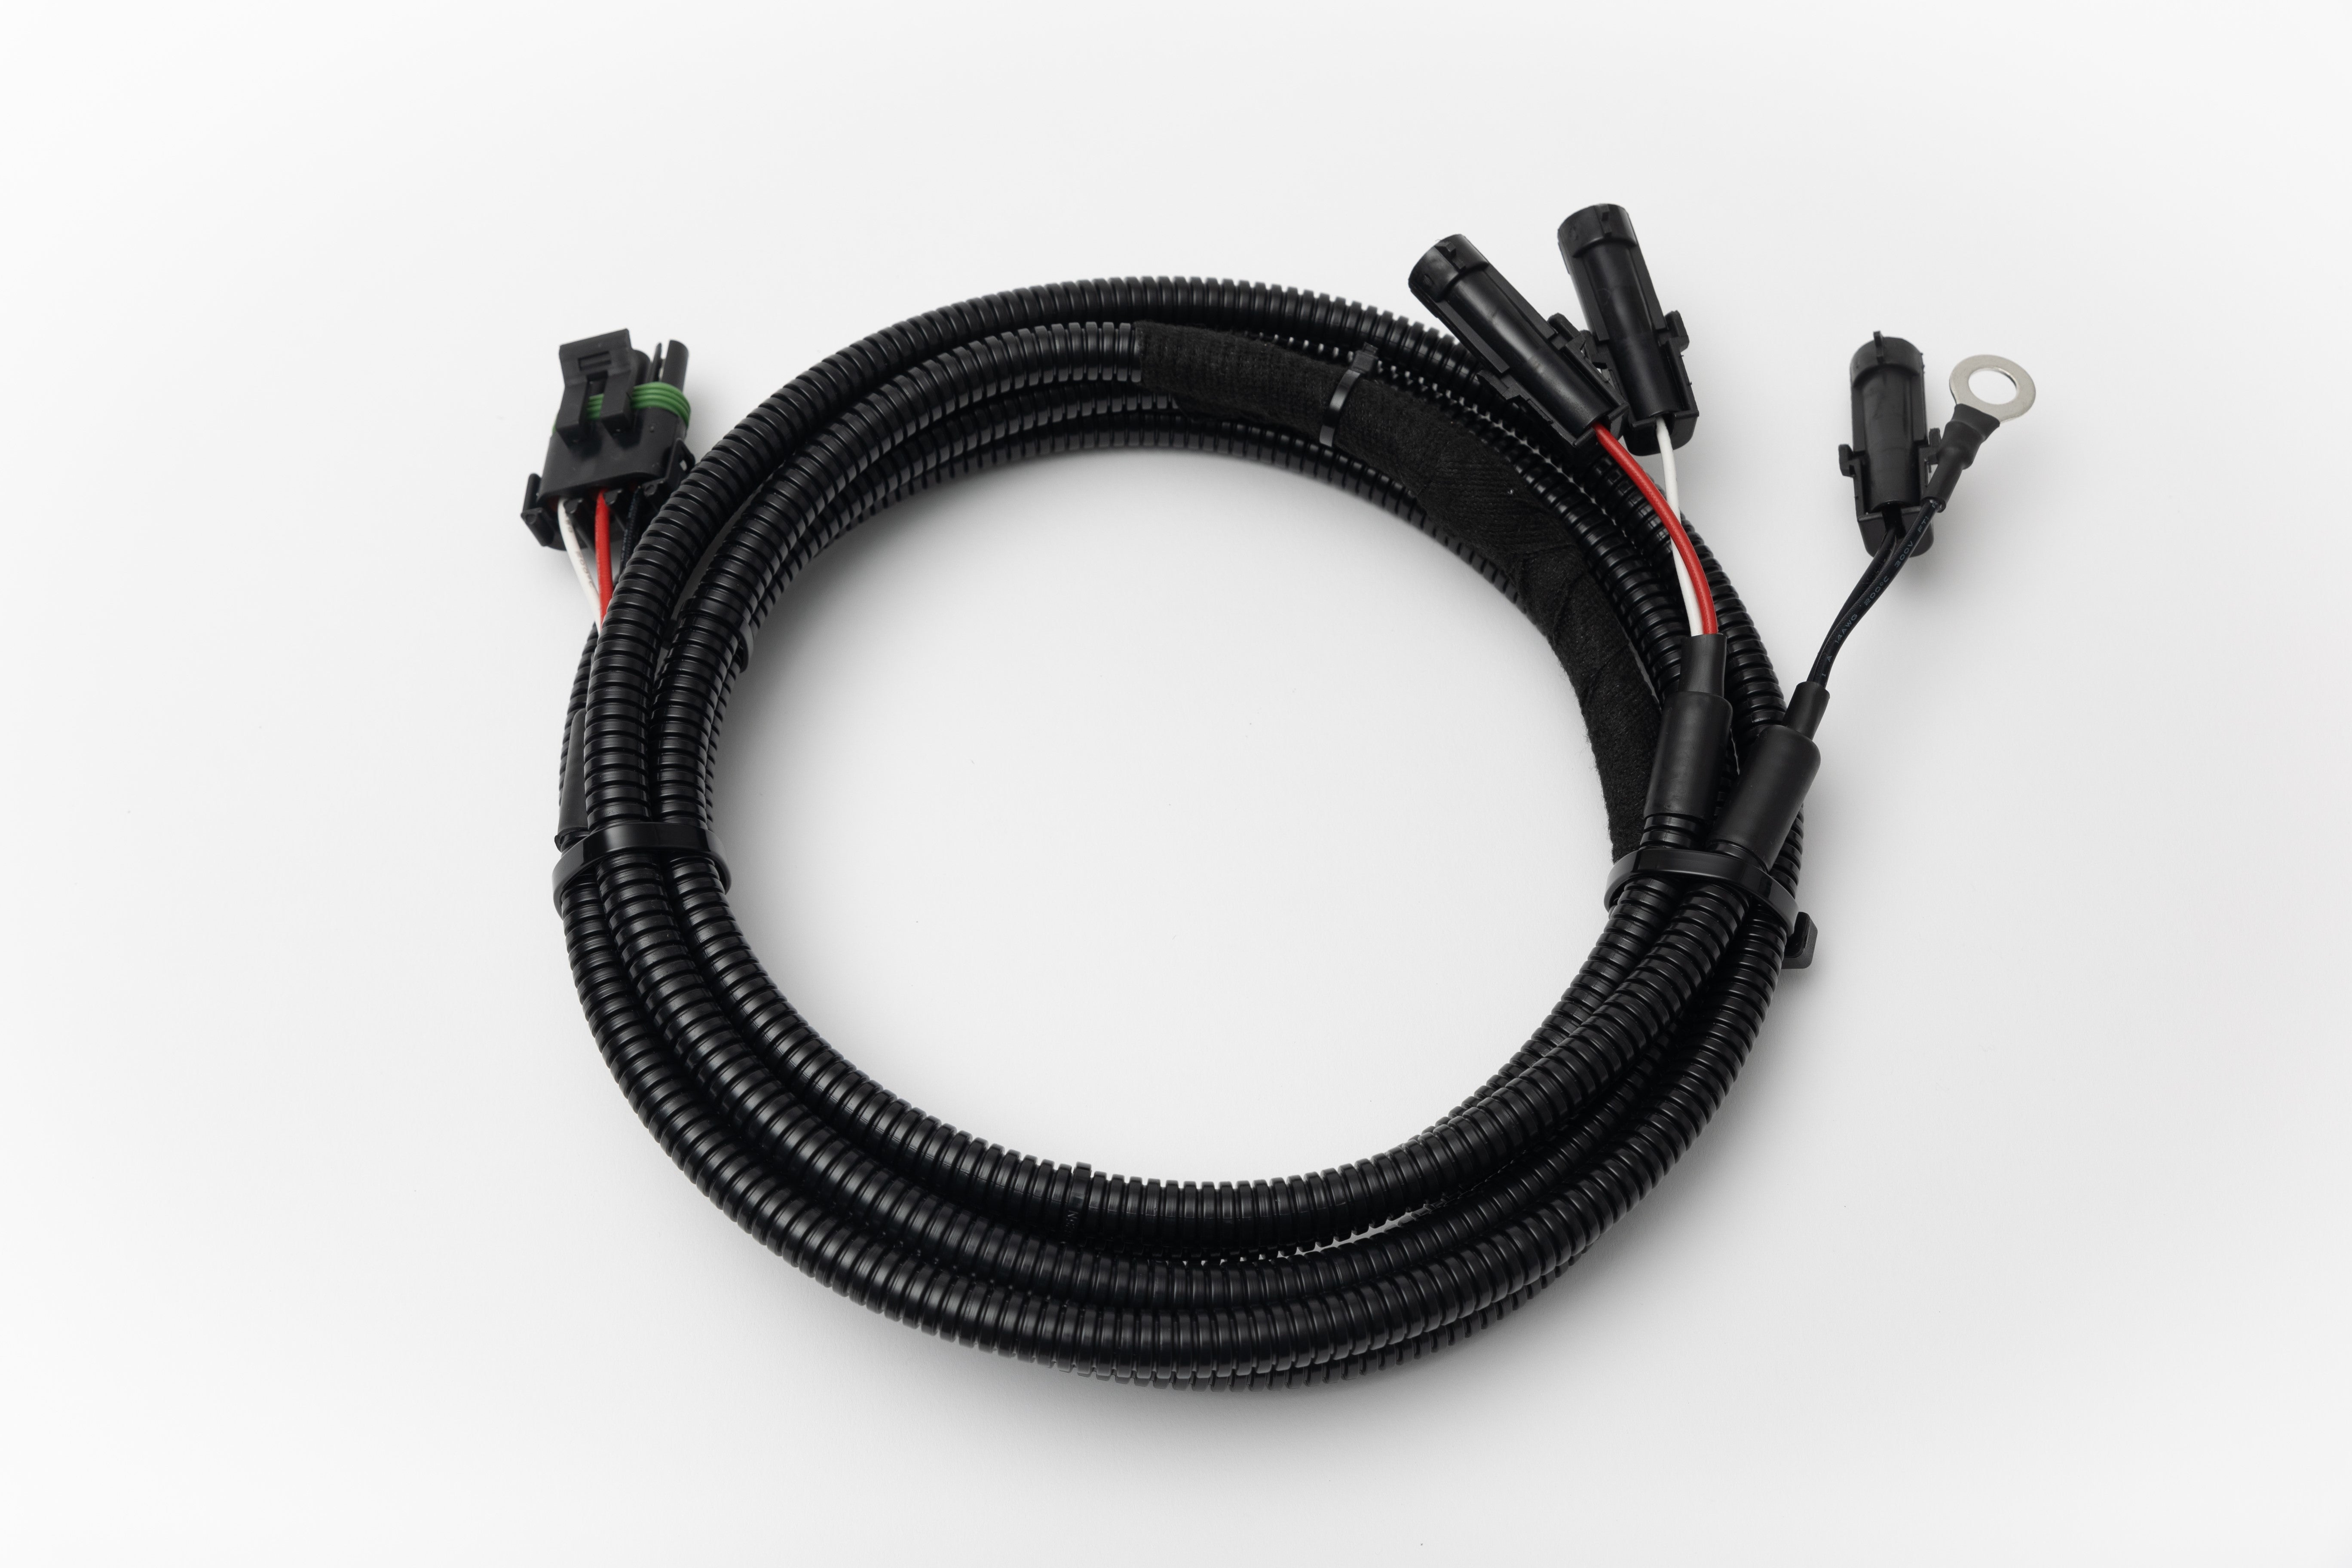 SPV Parts SHORT Light Bar Harness - SPV Harness System (Works with MANY vehicles, See Details)